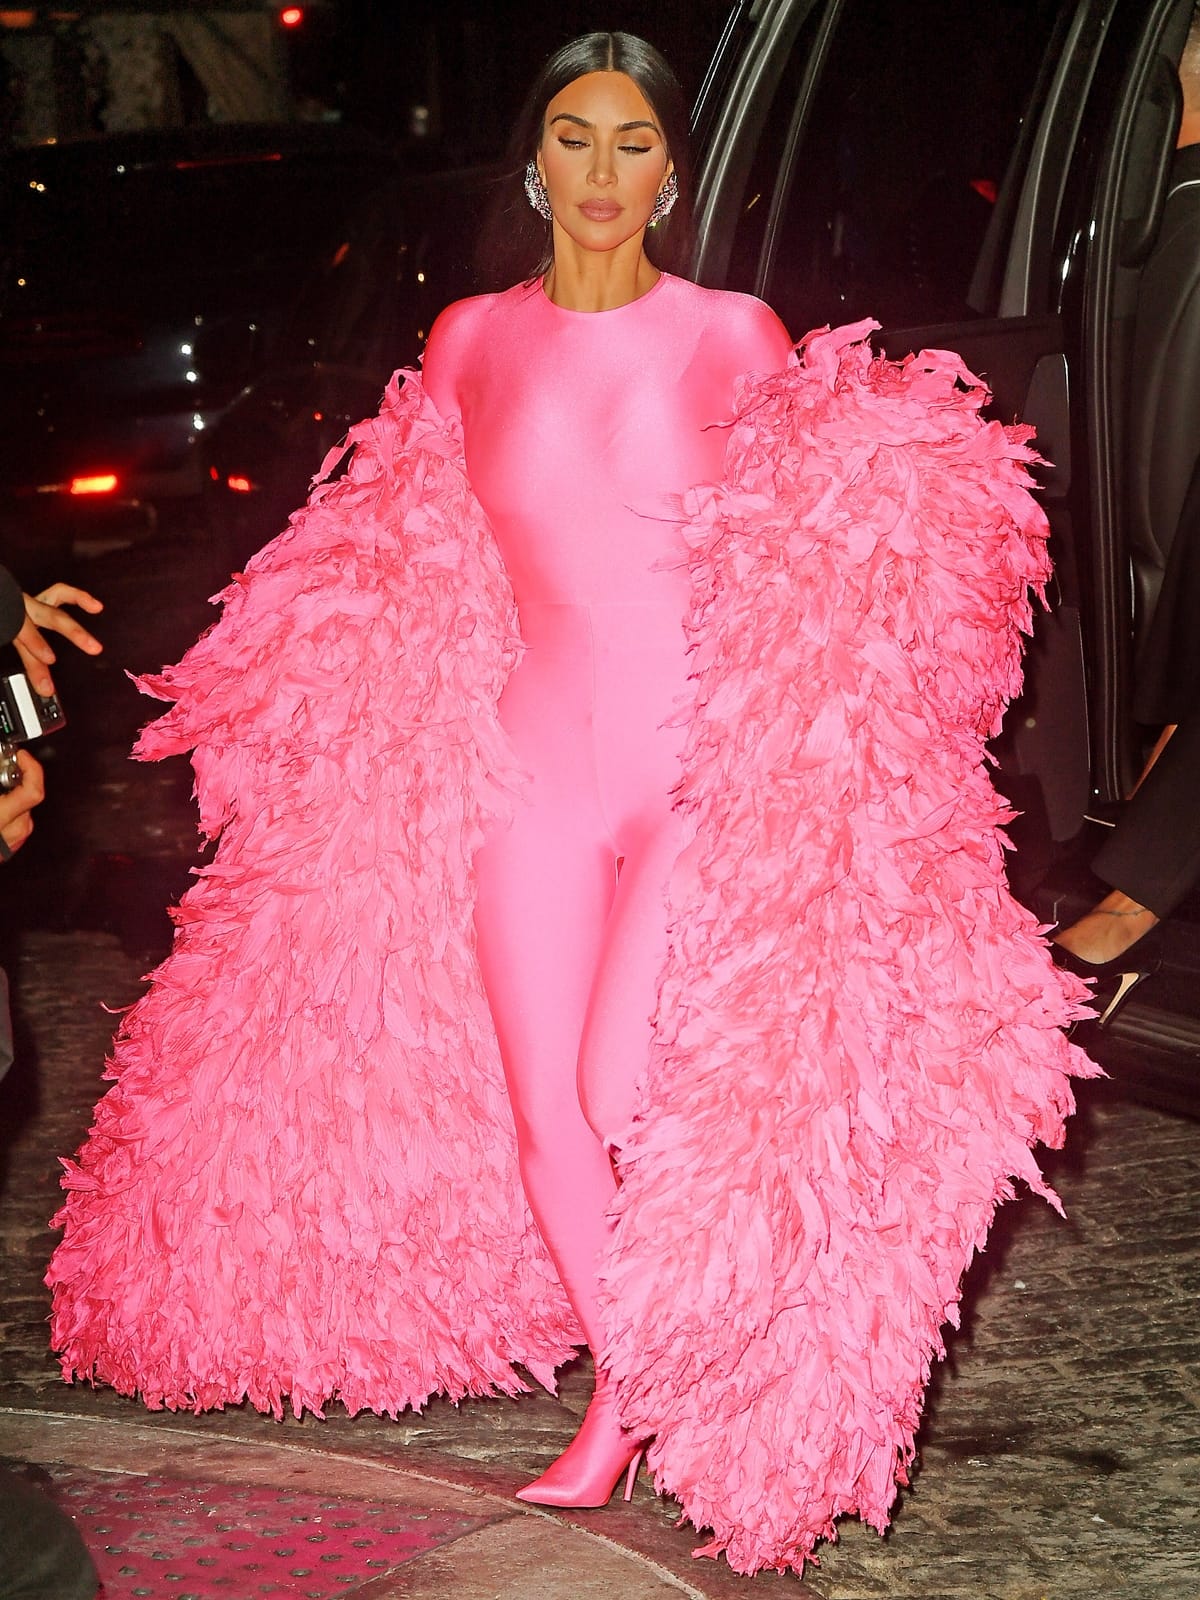 Kim Kardashian heads to the SNL afterparty at Zero Bond private members' club in New York City